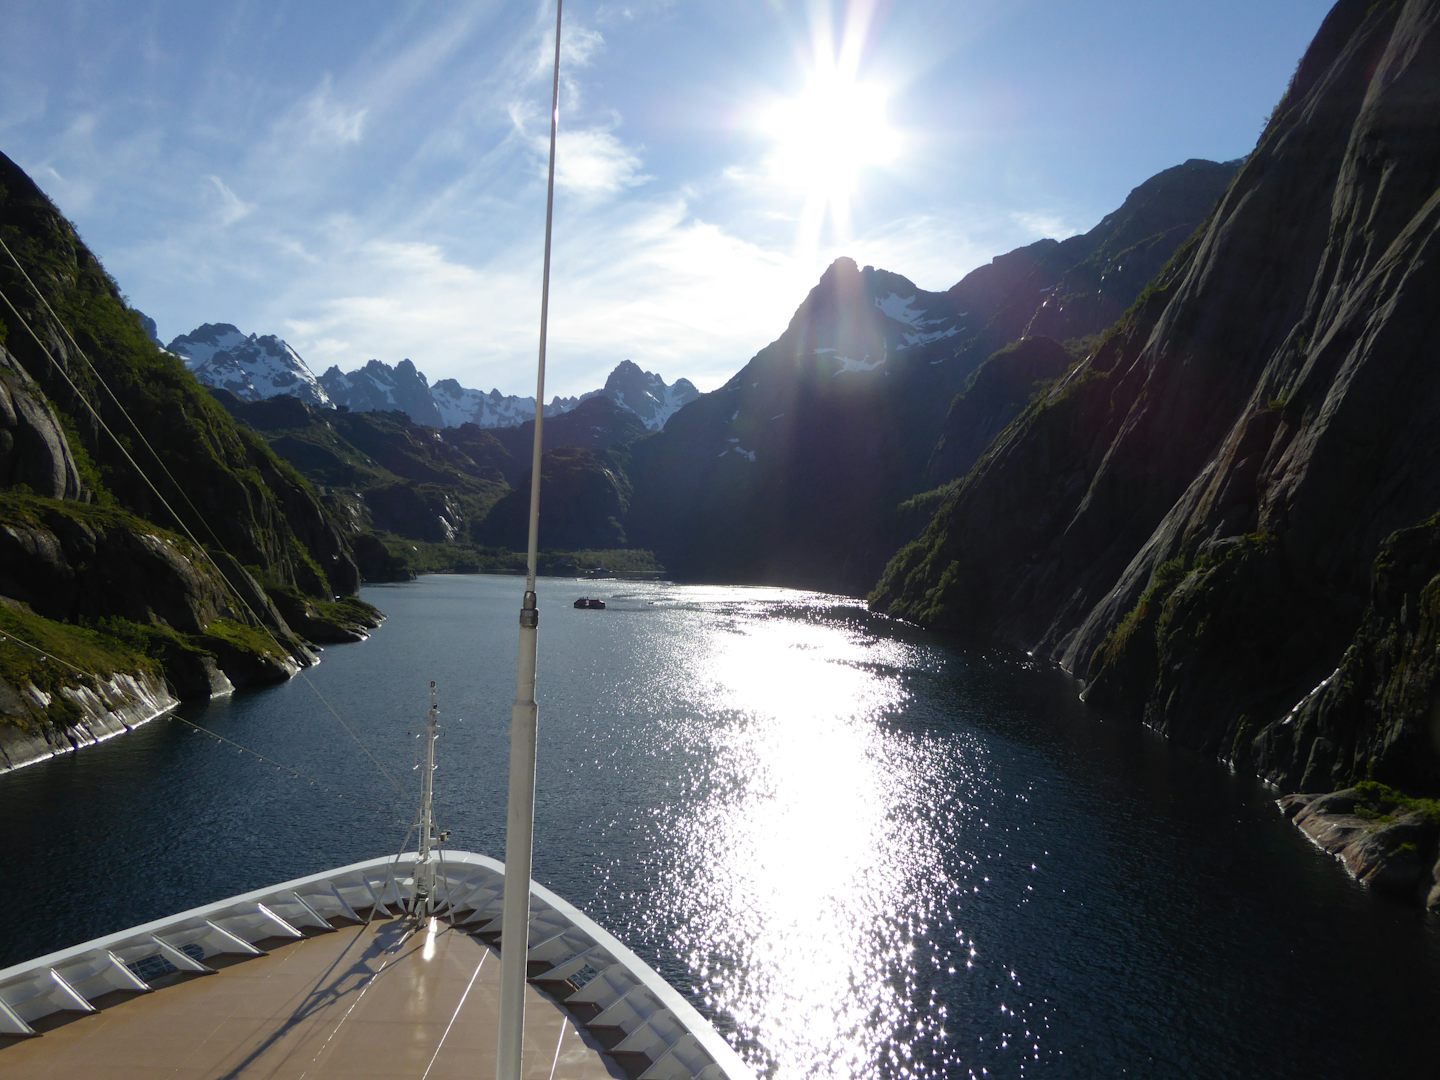 Sailing into the Trollfjord, a very special side excursion we were able to